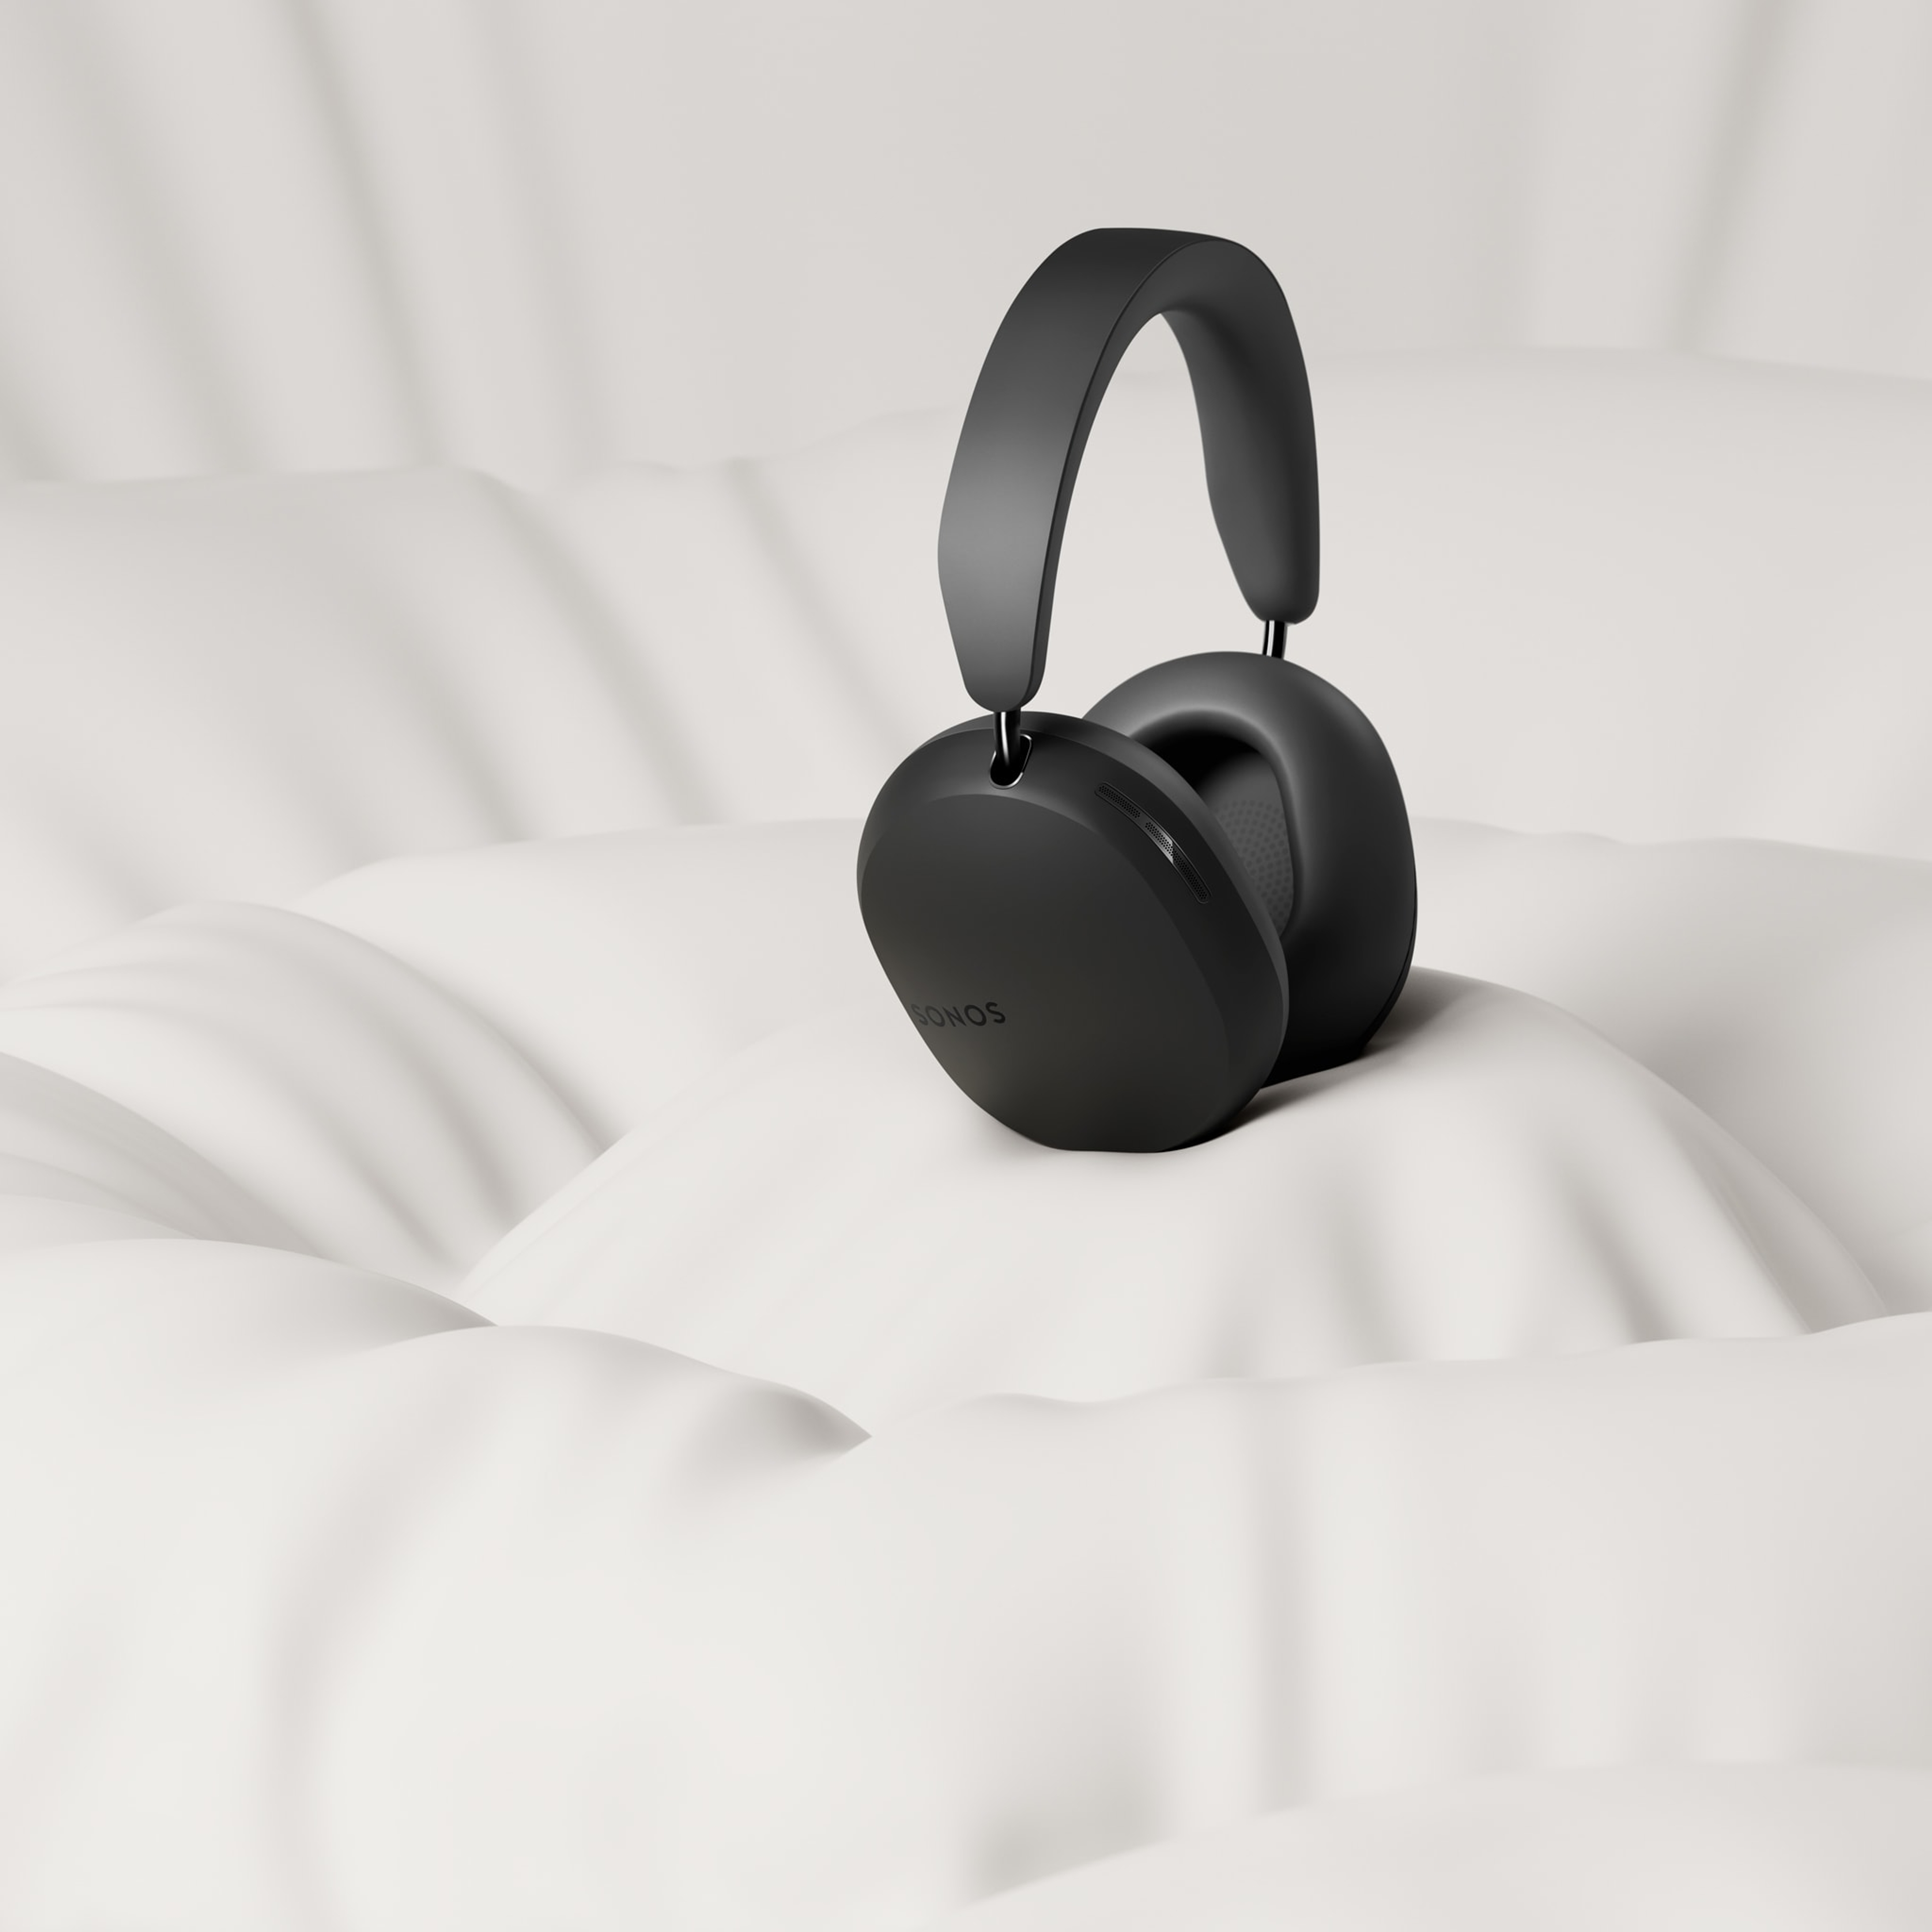 A pair of black Sonos Ace headphones on a pillowy white background